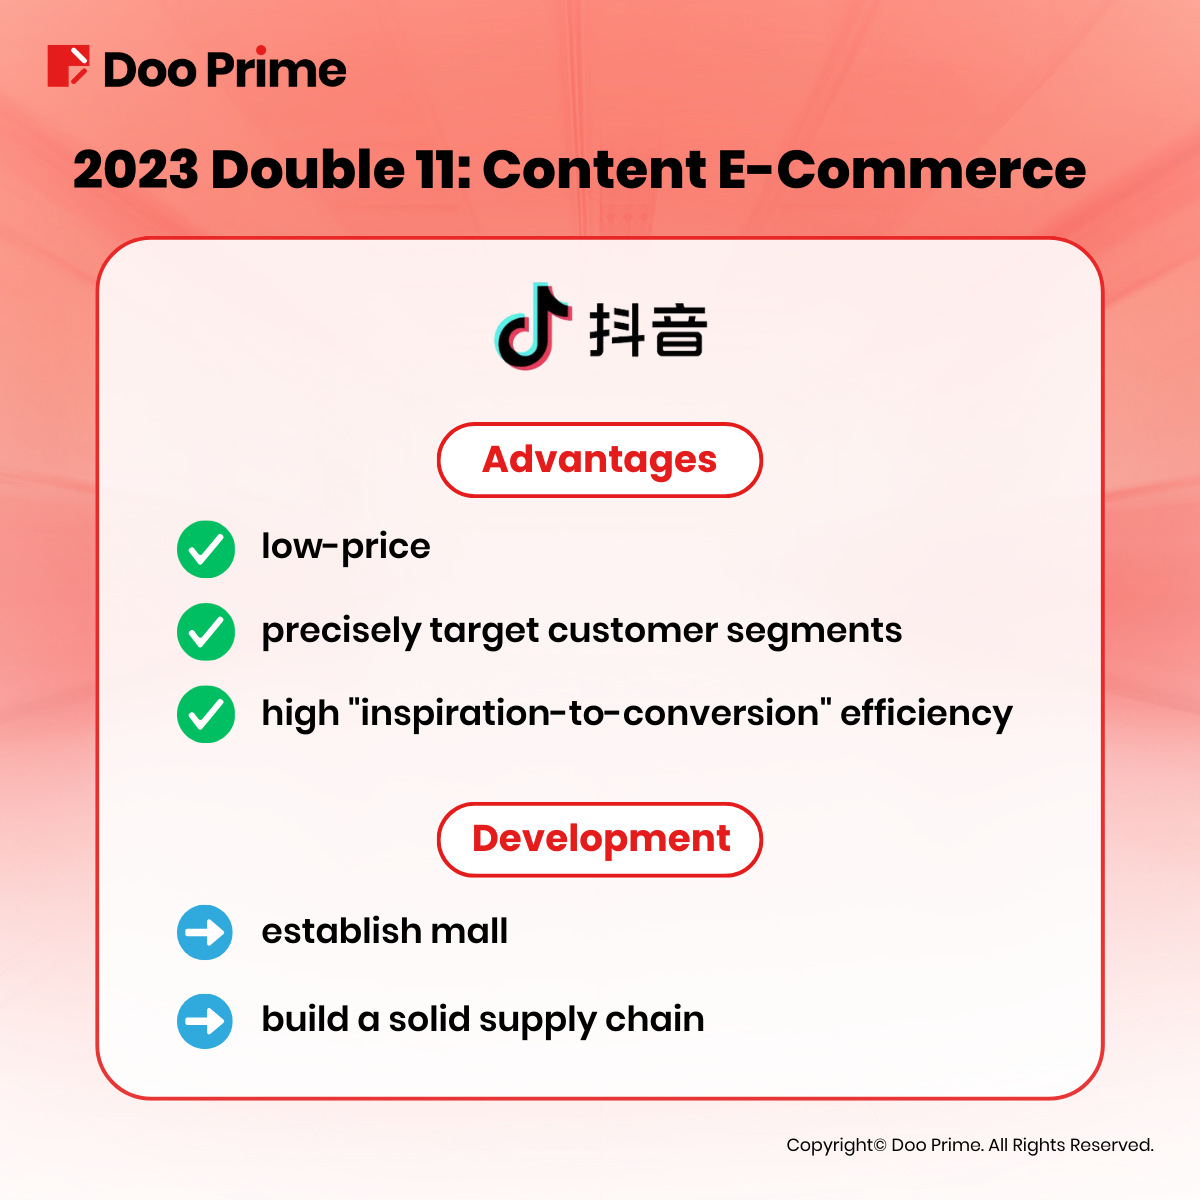 China's Double 11 Shopping Festival: A Game-Changer For E-commerce Platforms